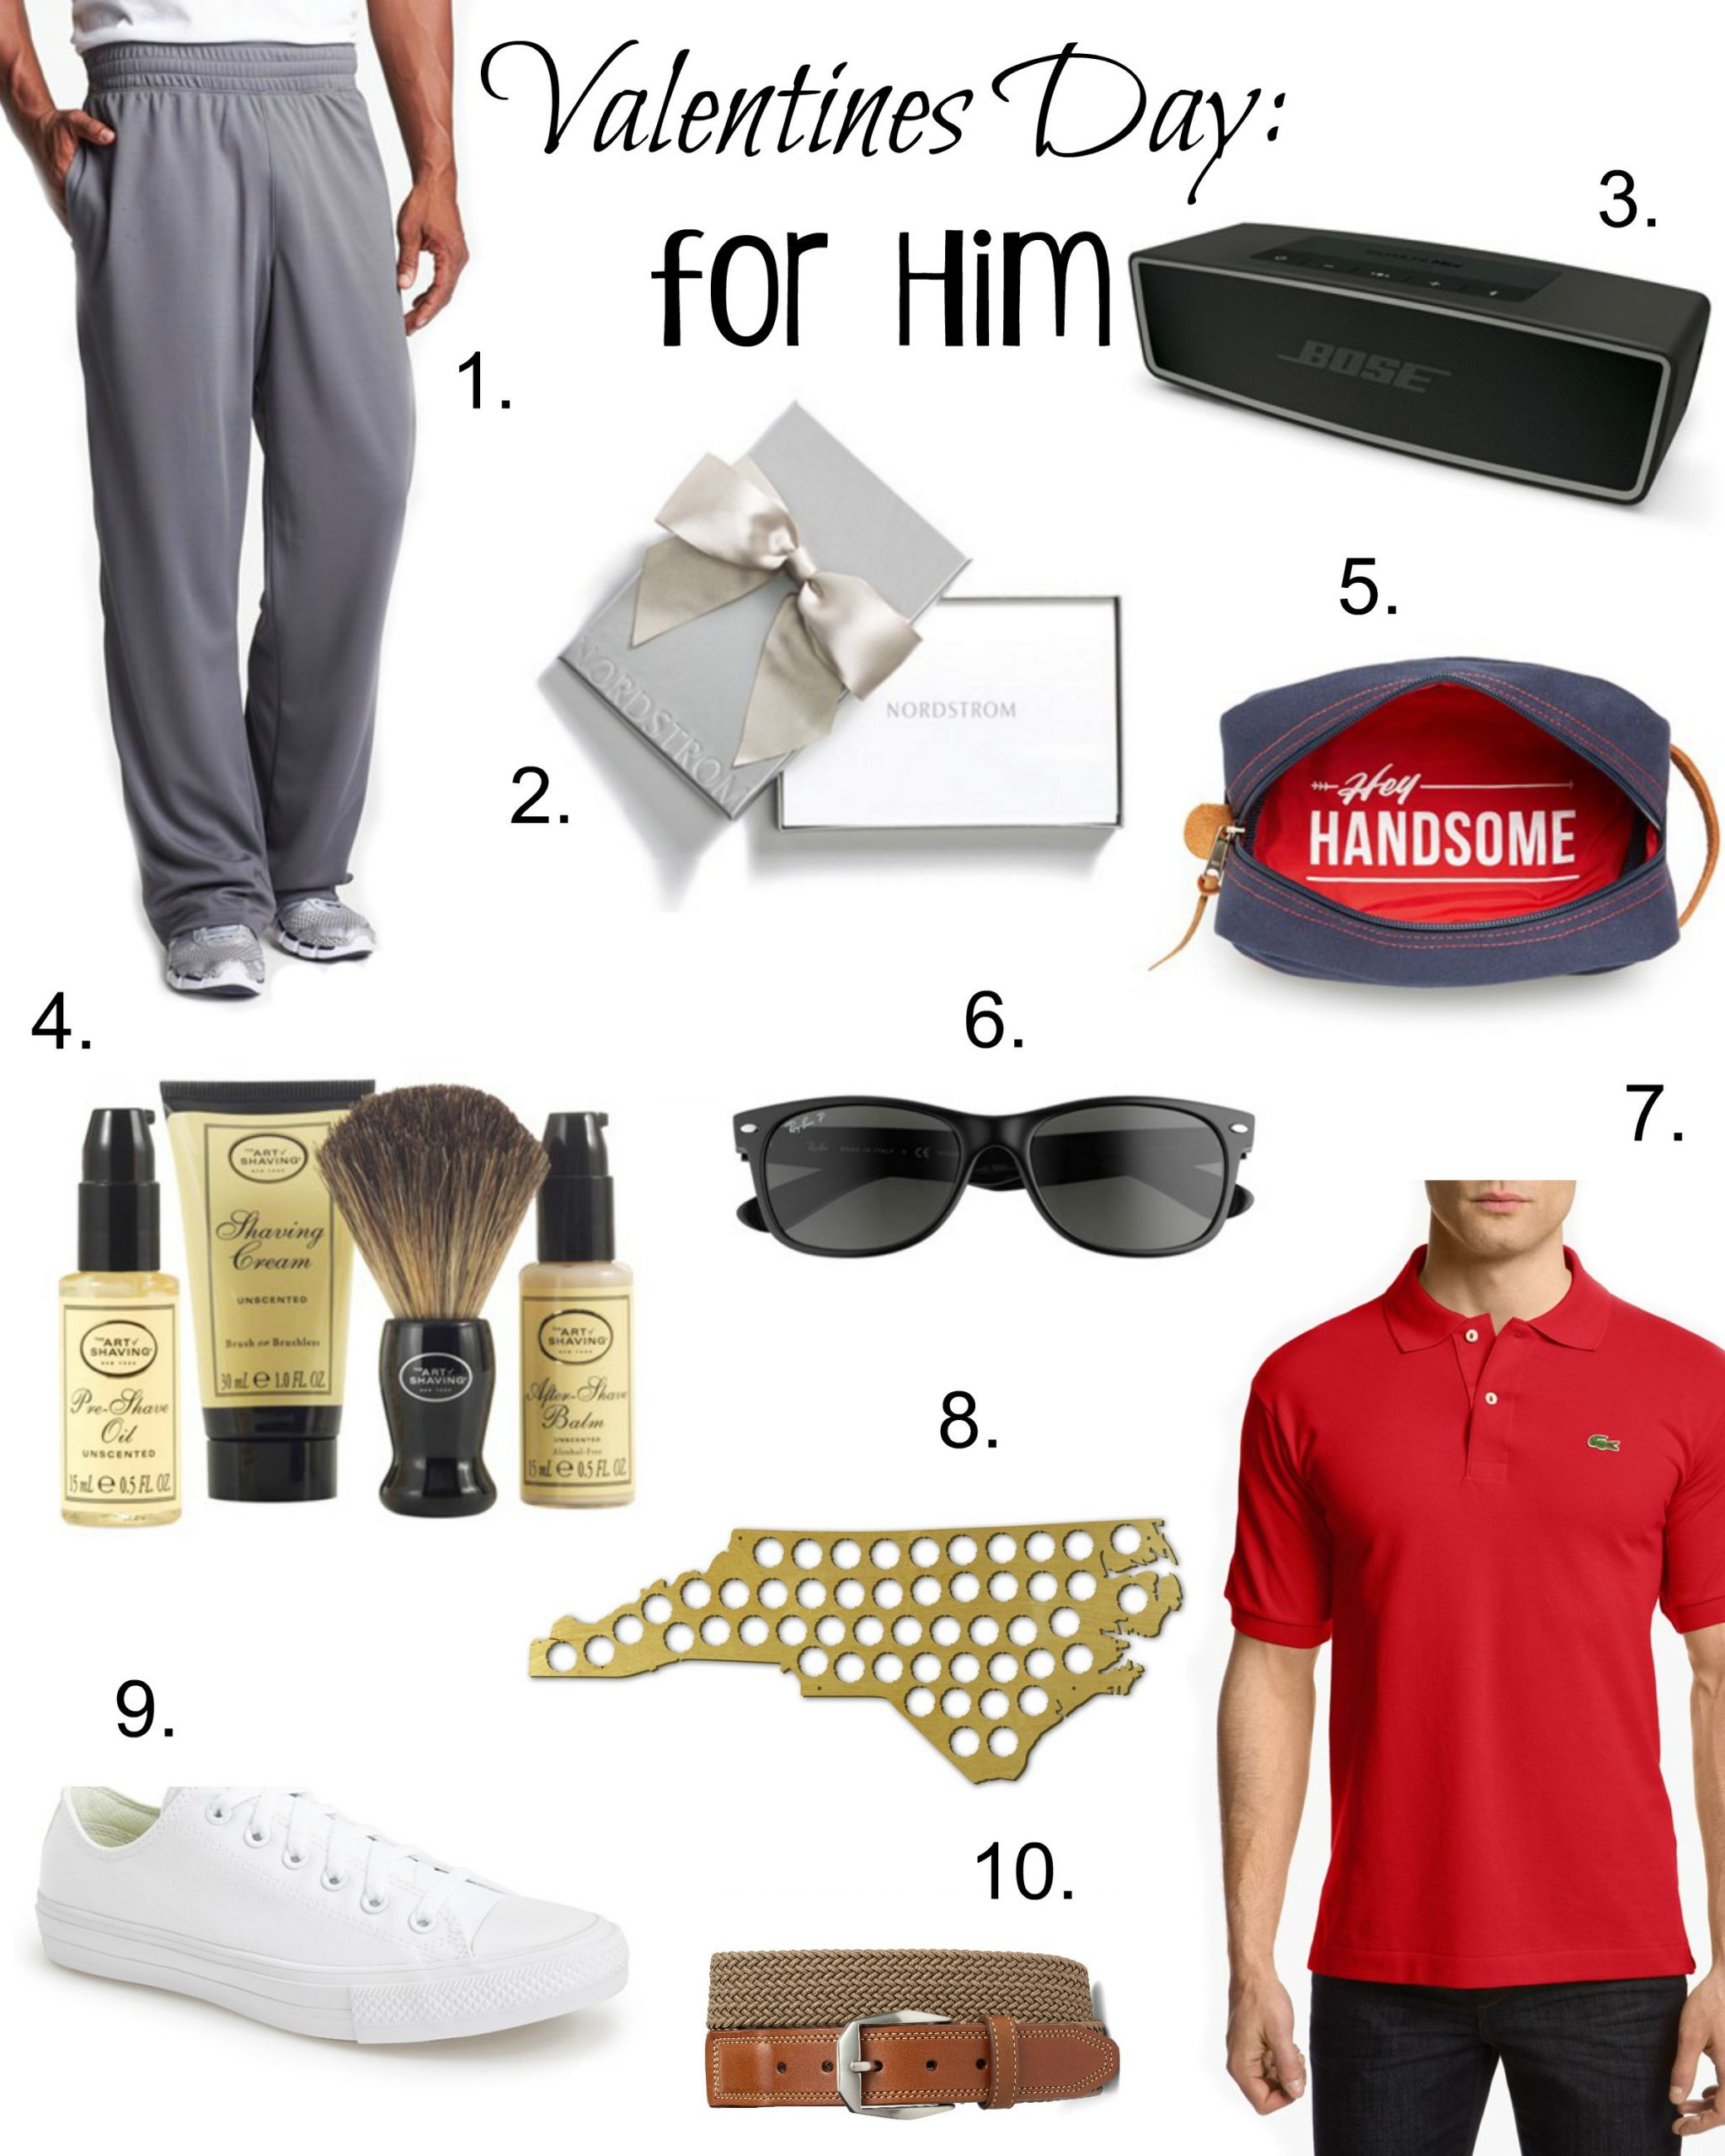 Great Valentines Day Gifts for Him Awesome top 10 Valentines Day Gifts for Him